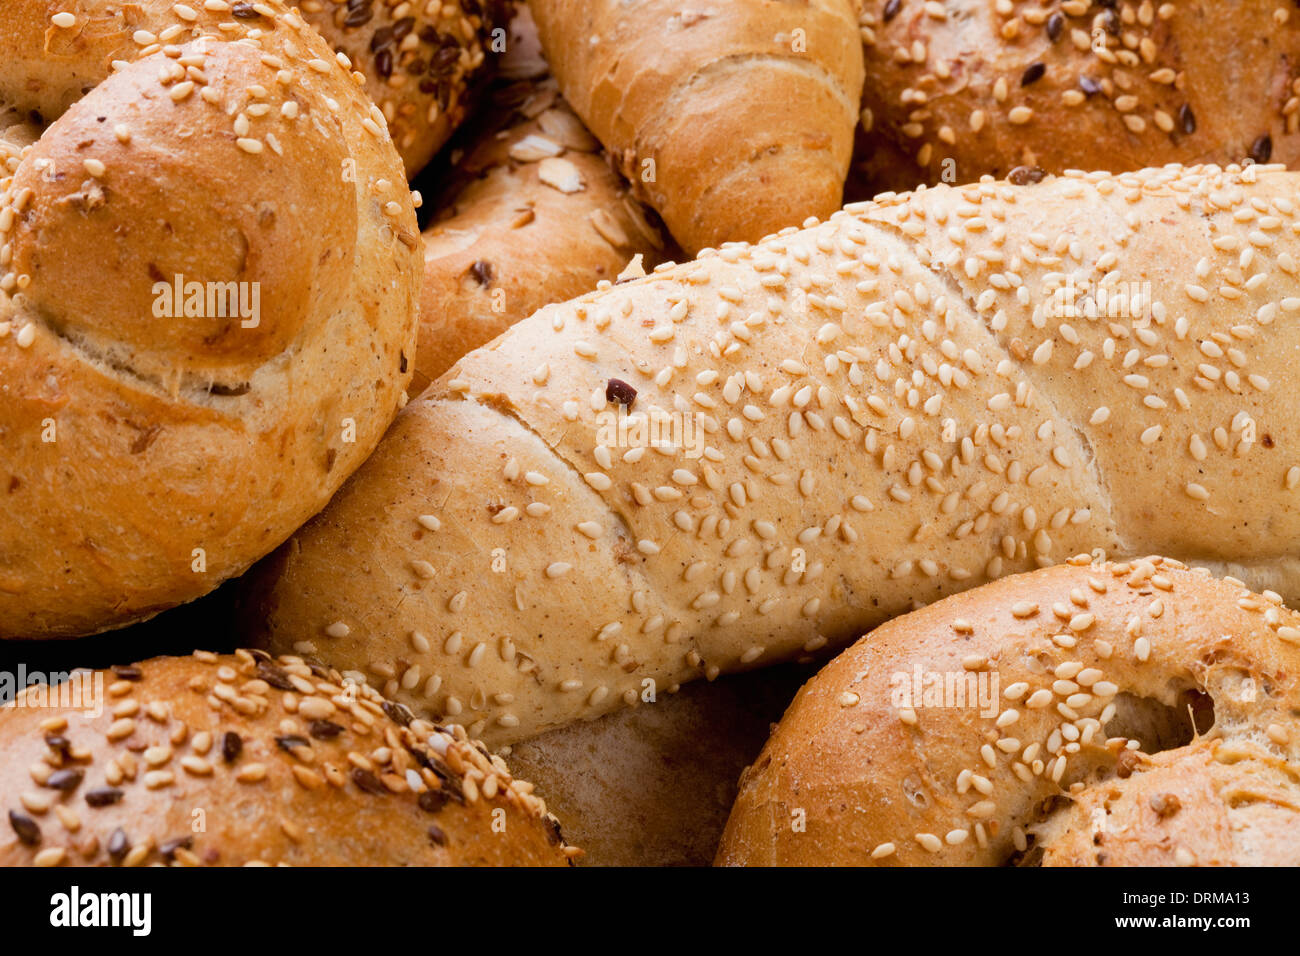 Assortment of Different Breads and Rolls from Bakery Stock Photo